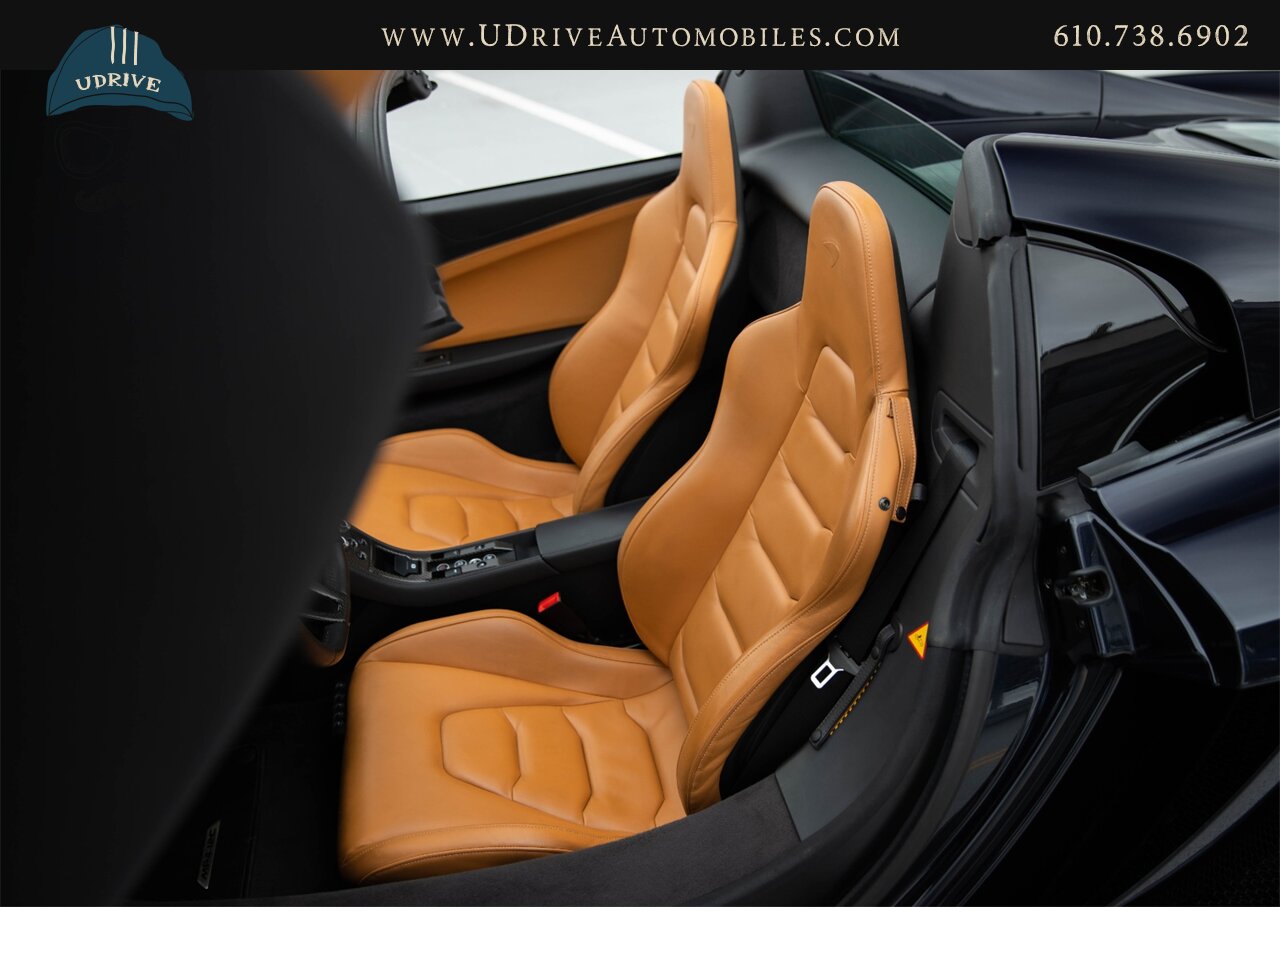 2013 McLaren MP4-12C Spider 1 Owner 6k Miles Carbon Fiber Full Leather  Sapphire Black over Natural Tan Leather - Photo 33 - West Chester, PA 19382